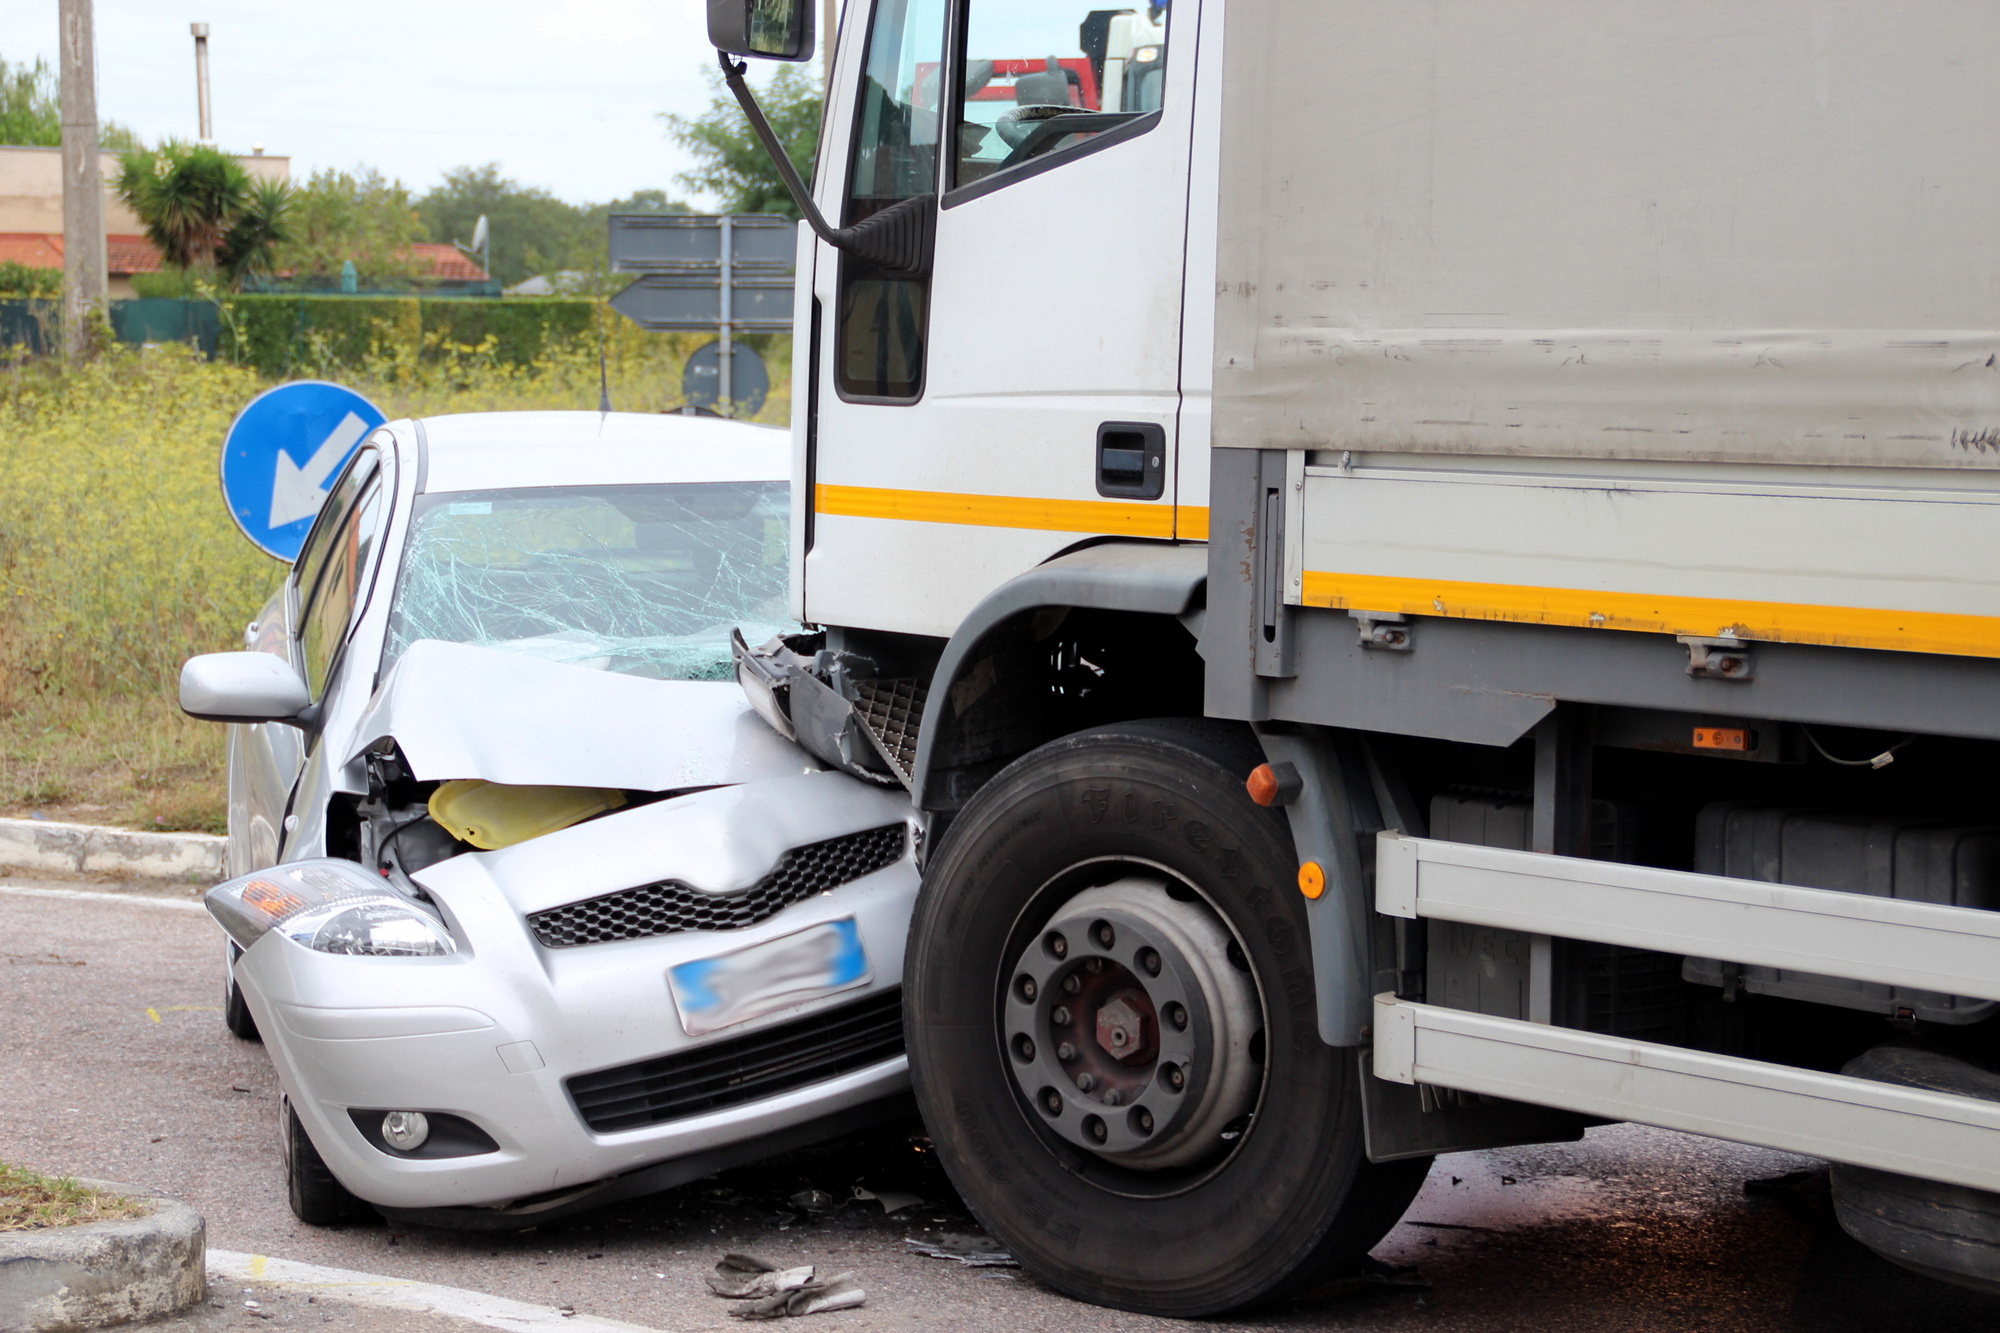 Find out why you need a truck accident lawyer